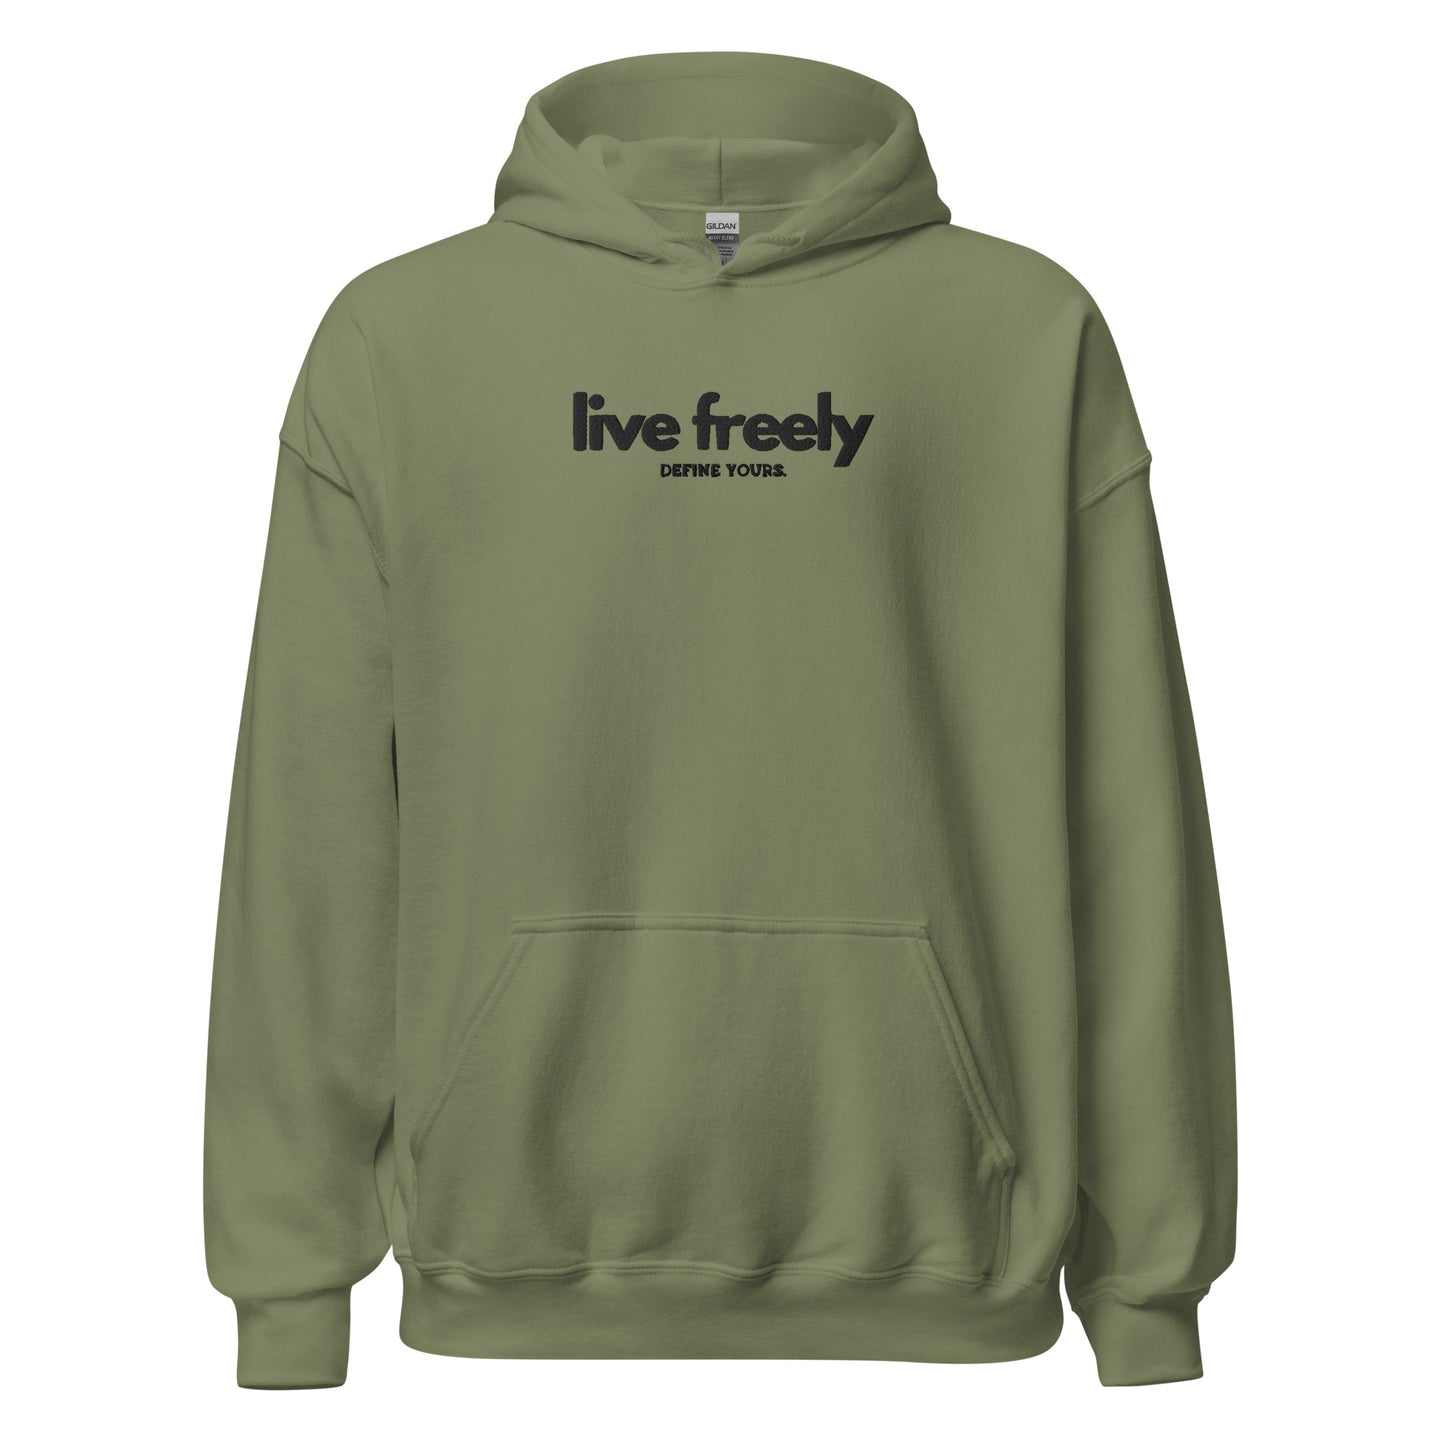 Live Freely Embroidered Unisex Hoodie